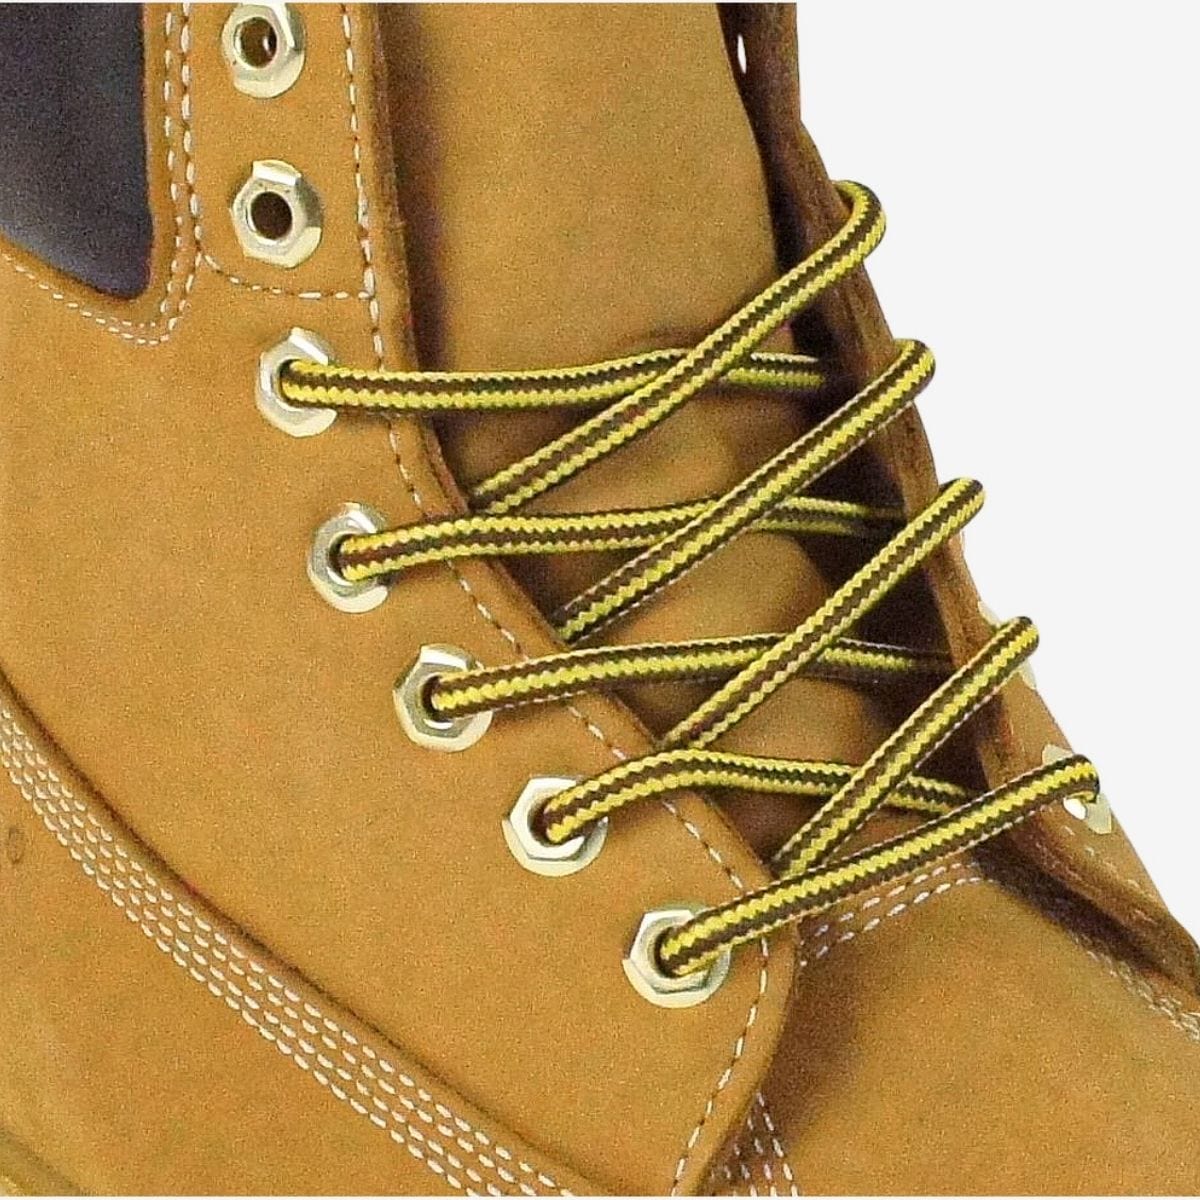 shop-round-shoelaces-online-in-yellow-and-brown-for-boots-sneakers-and-running-shoes